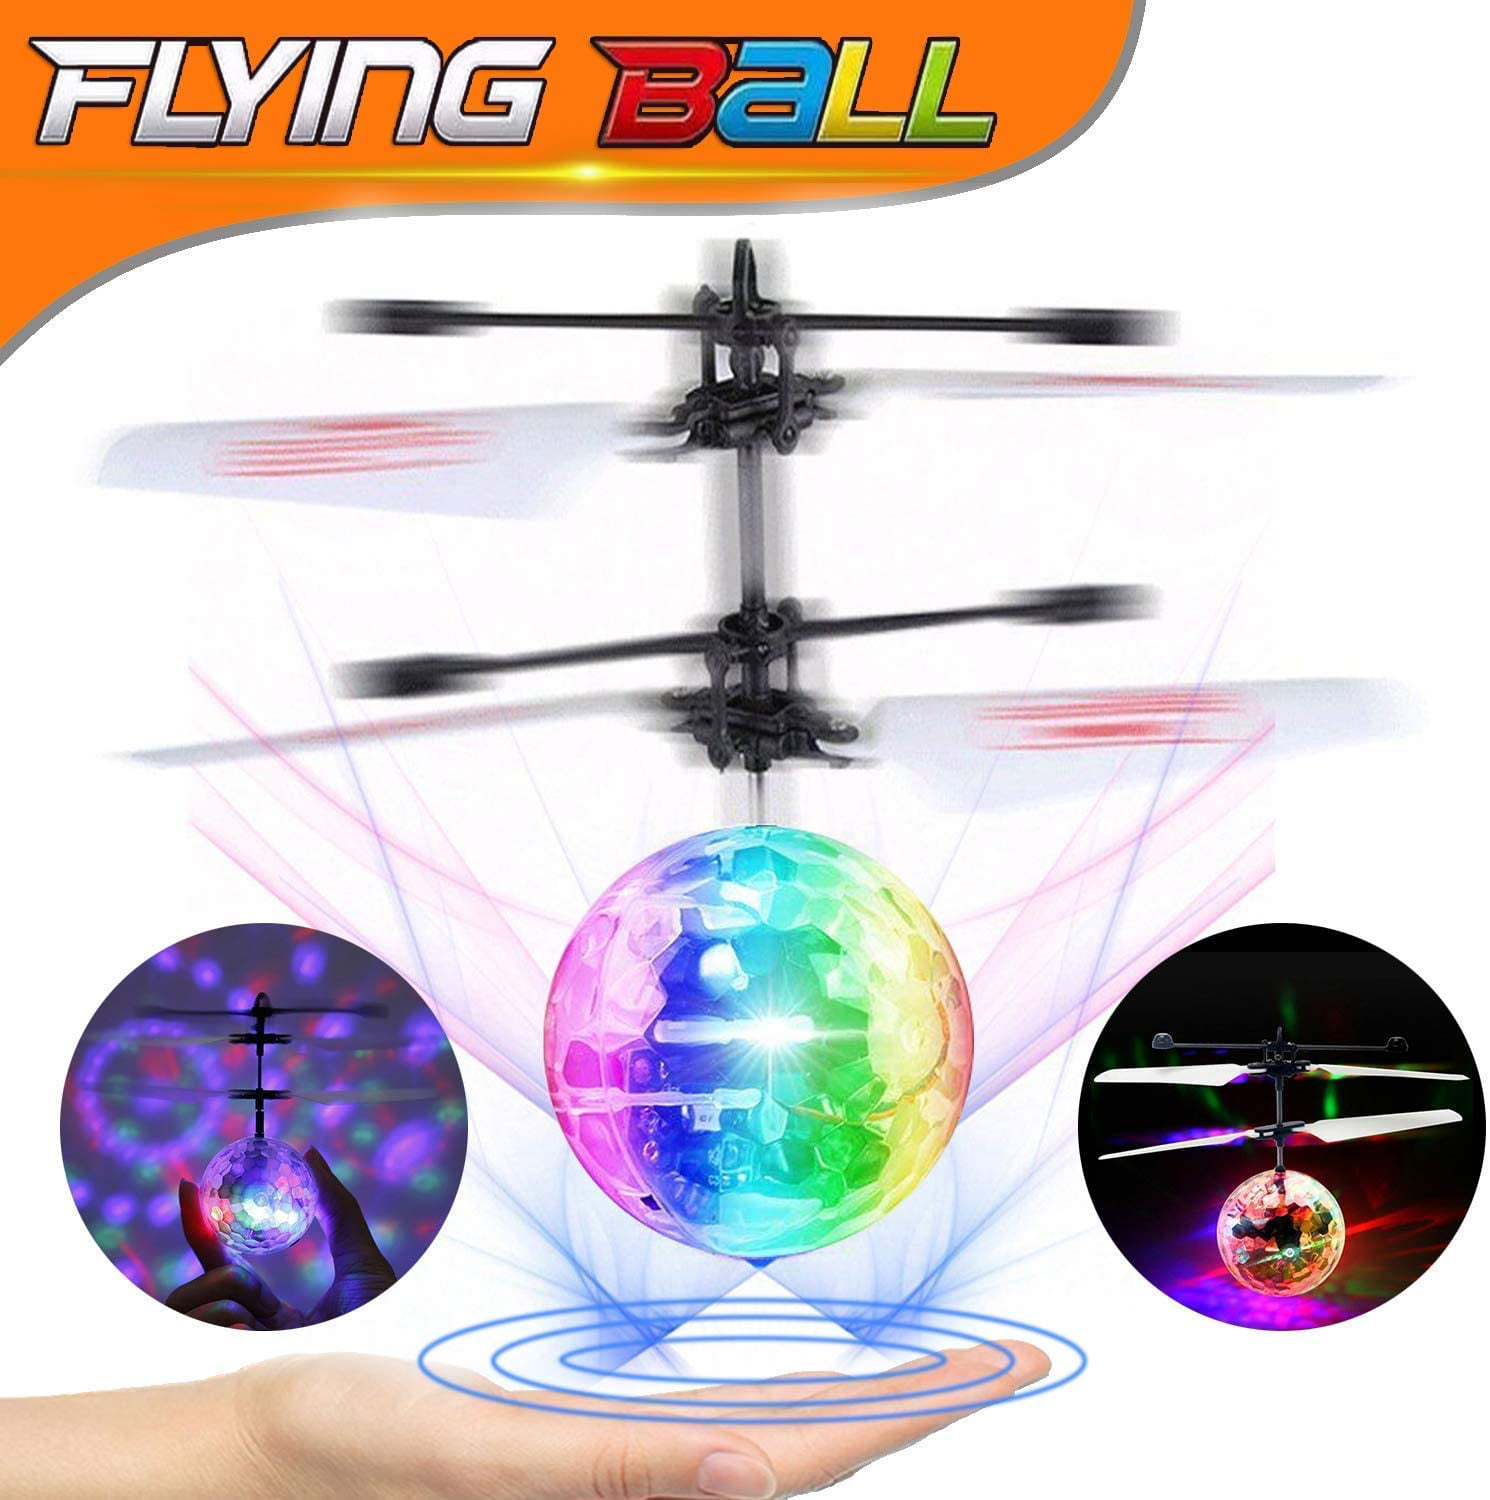 Blue JoyGeek Mini Drone for Kids RC Quadcopter UFO Remote Control Helicopter with 2.4G 4CH 6 Axis Headless Mode One Key Return Flying Toys for Boys Girls 